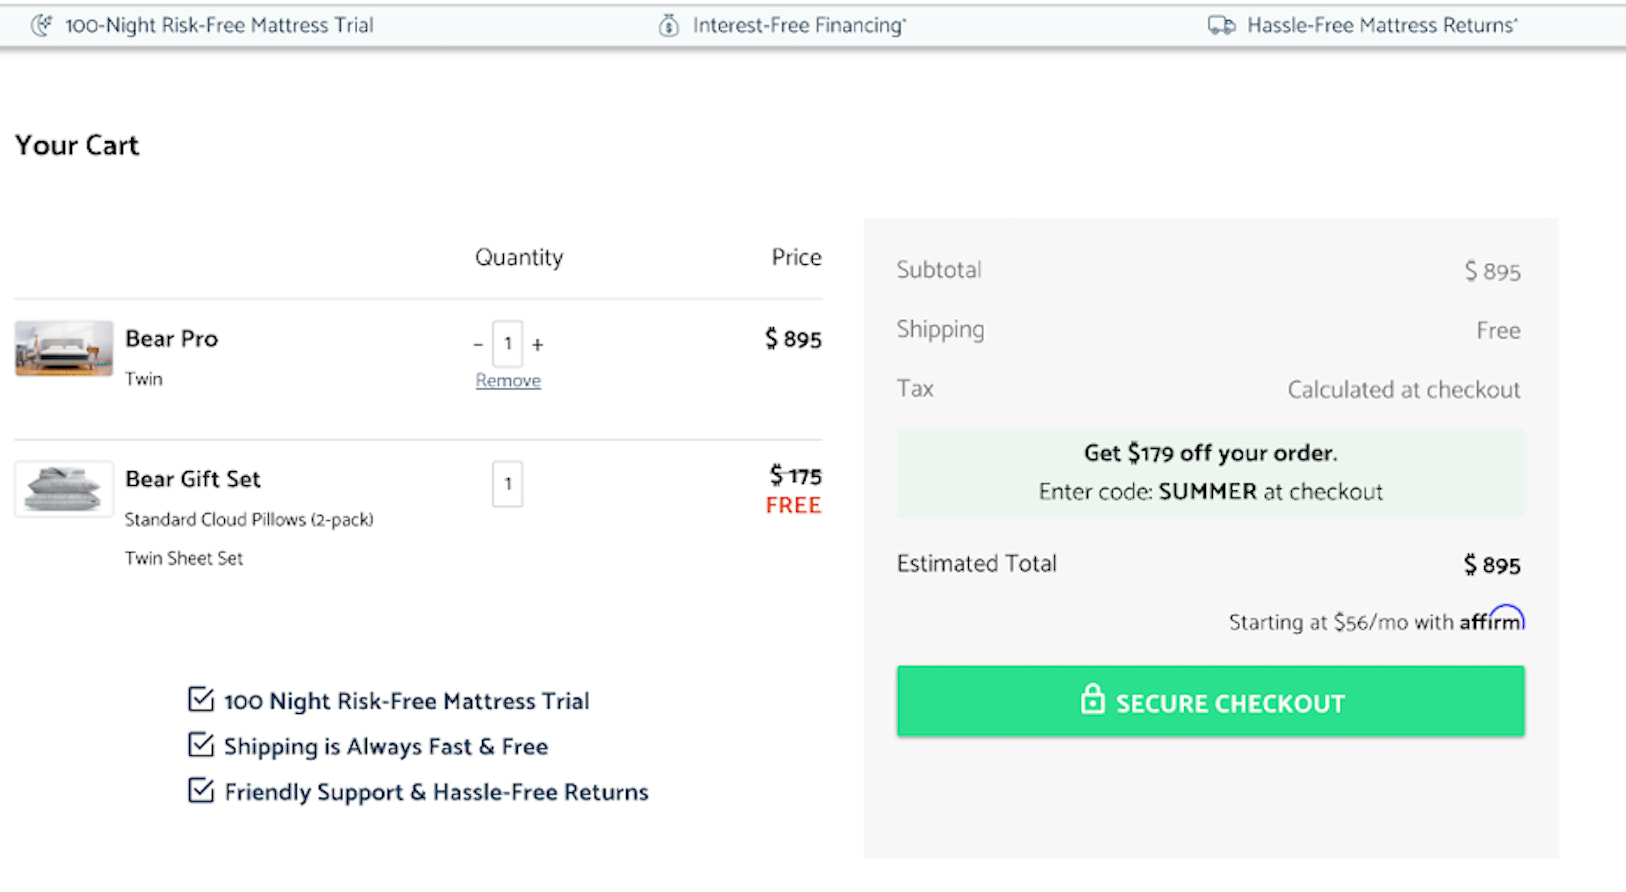 60 Free Trust Badges to Handle the 79.7% Cart Abandonment Reasons